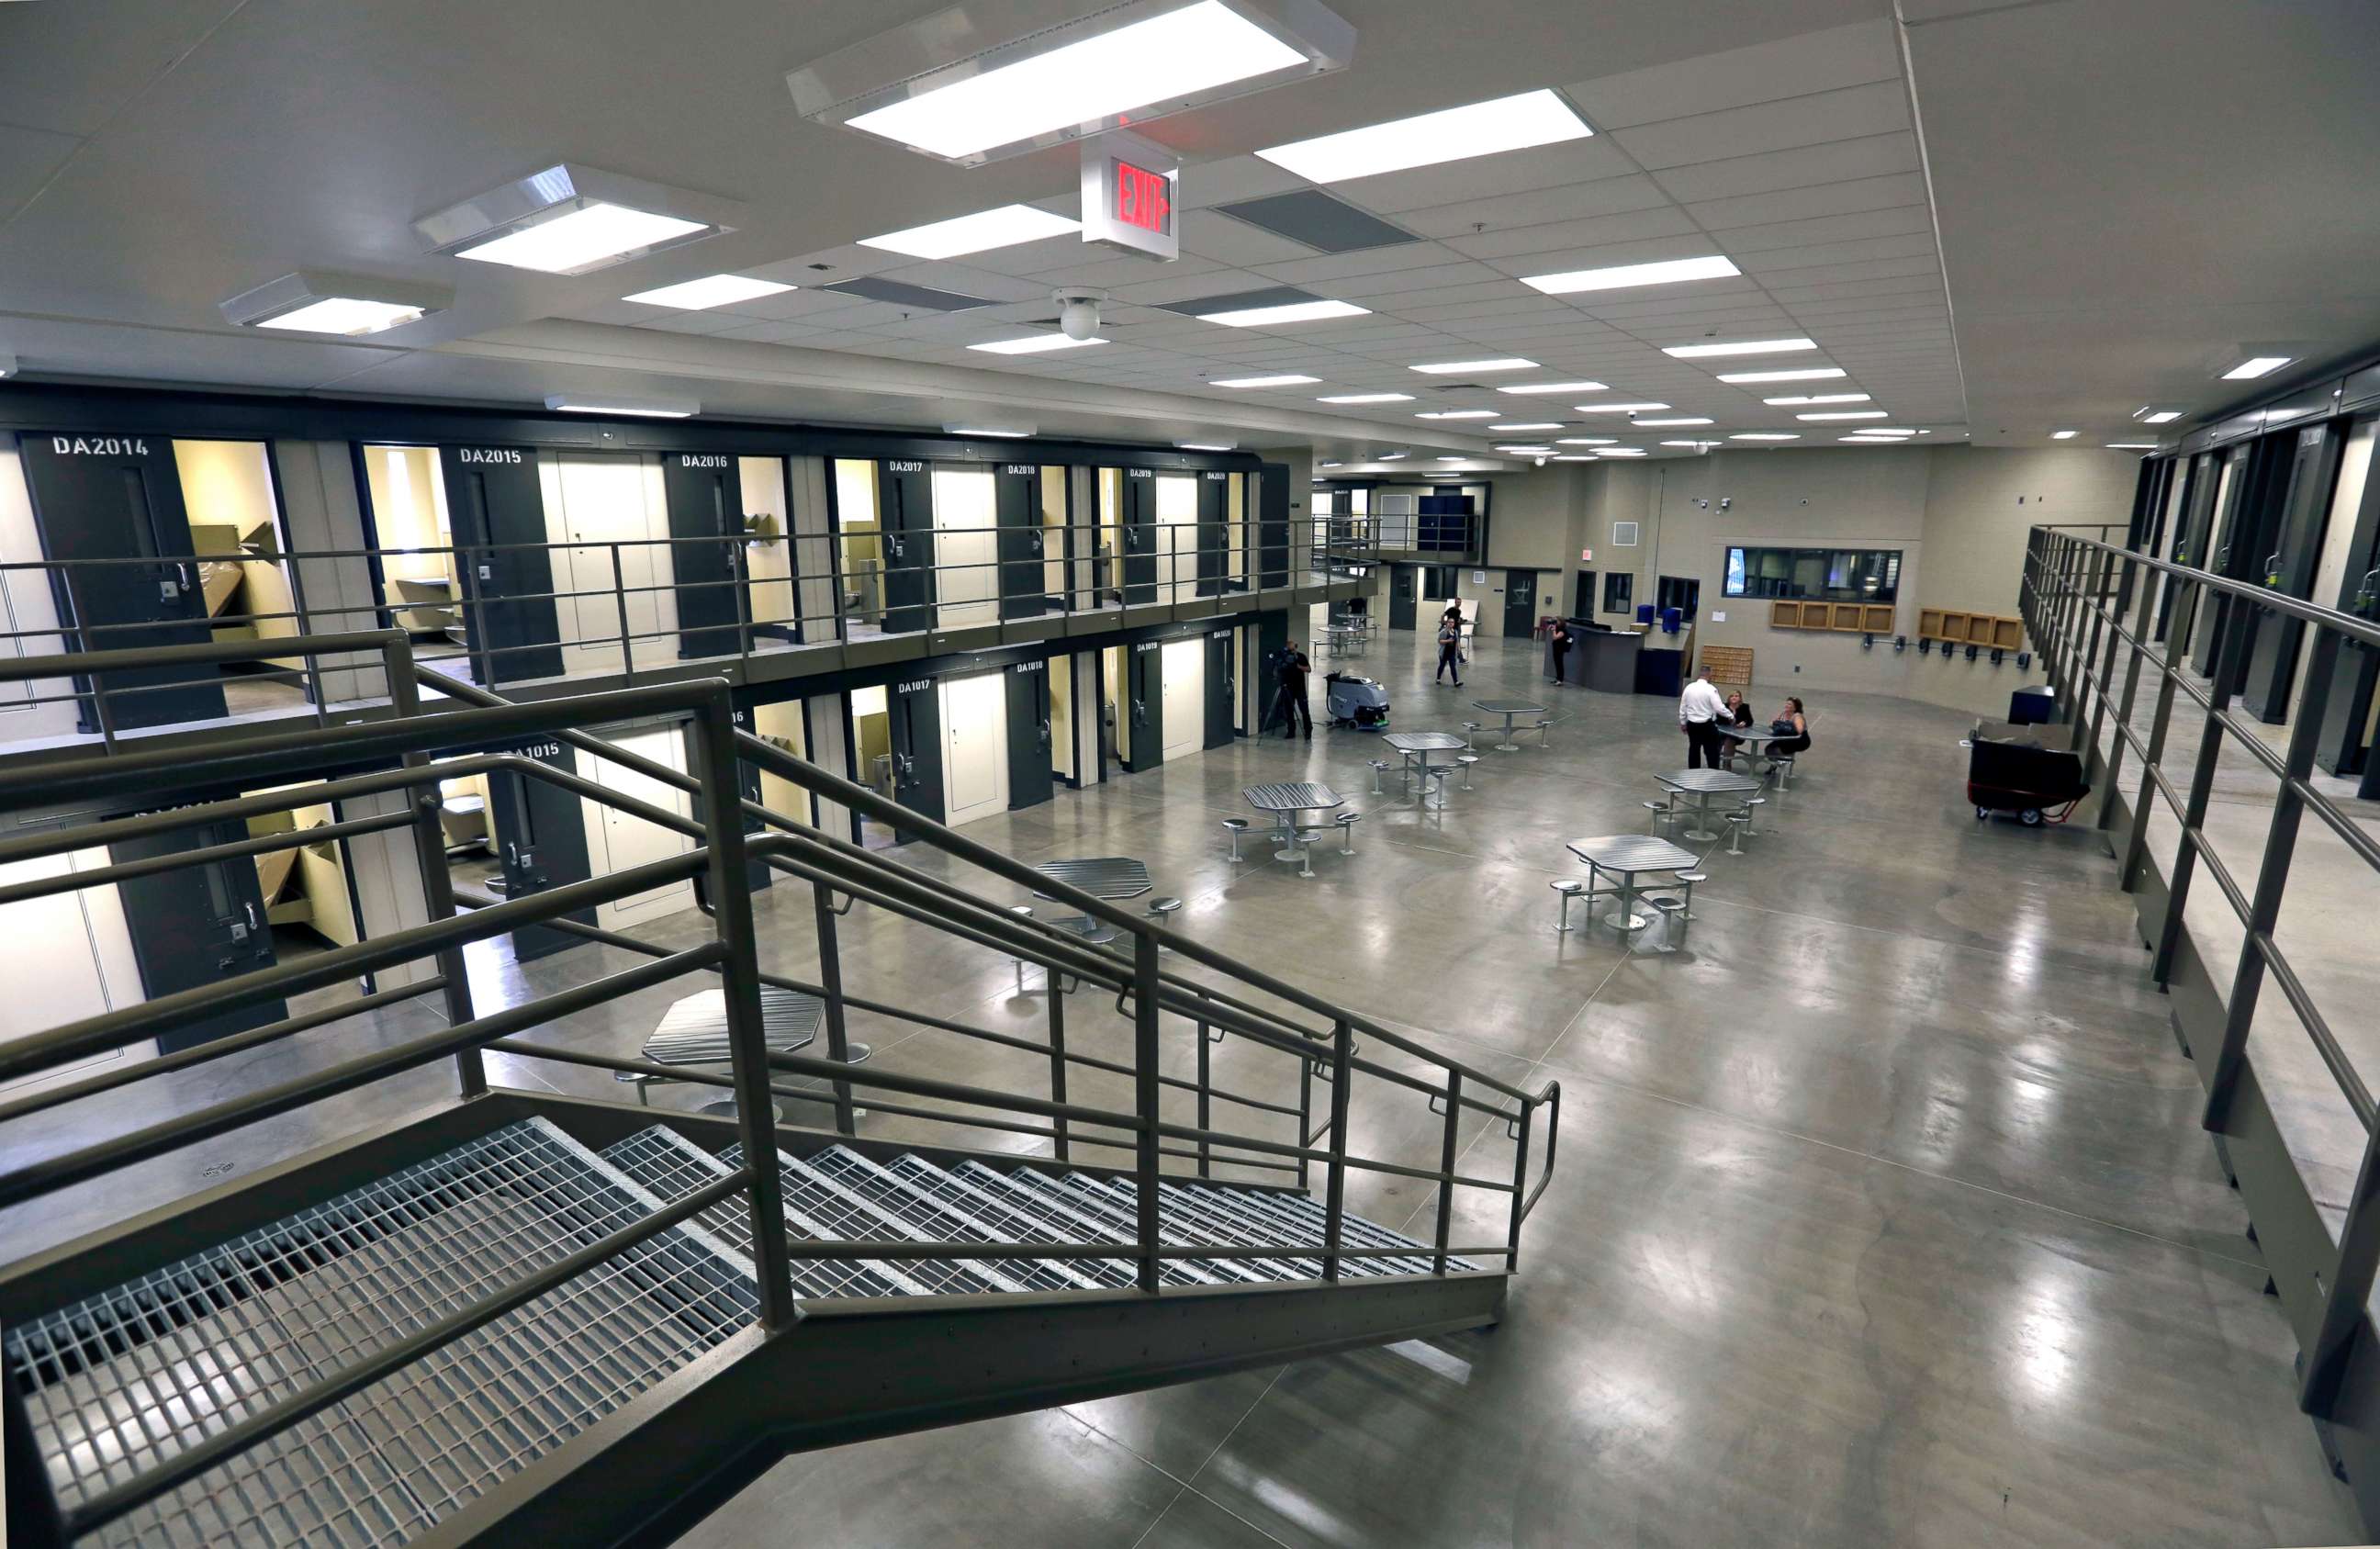 PHOTO: A housing unit is pictured in the west section of the State Correctional Institution at Phoenix in Collegeville, Pa., June 1, 2018.